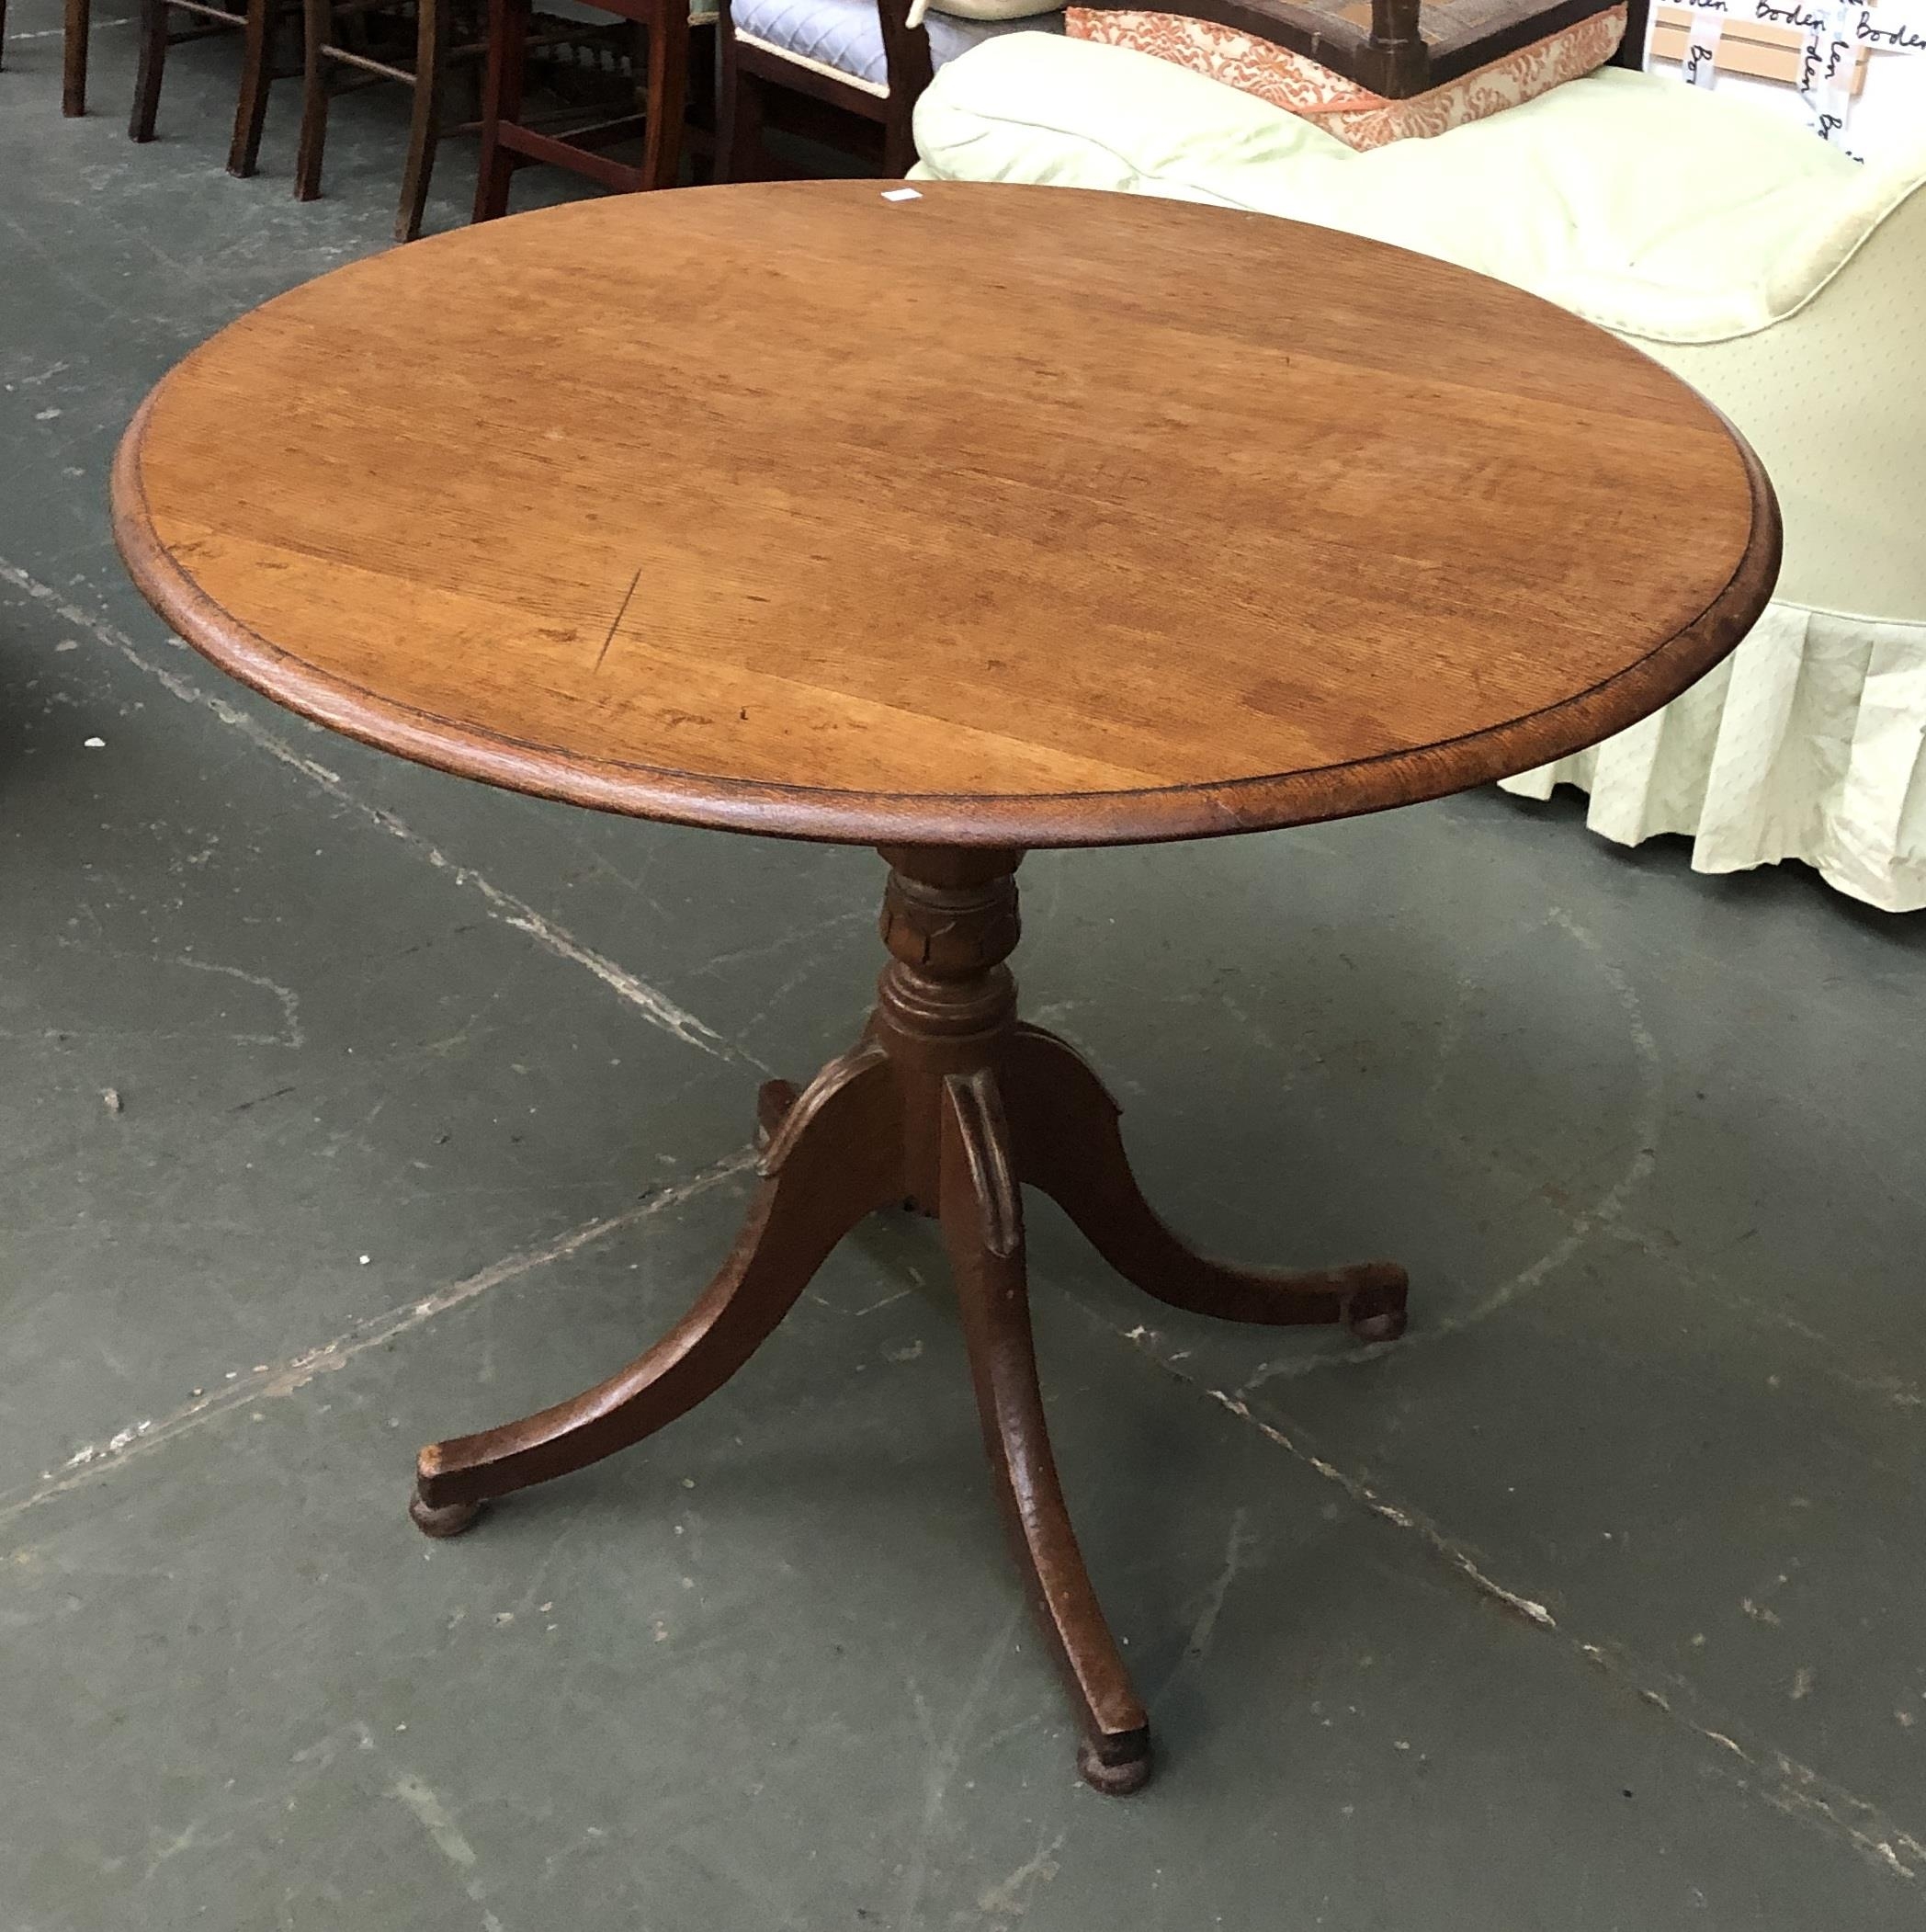 An early 20th century oak tip top tripod table, on four swept legs, 92x72cmH - Image 2 of 2